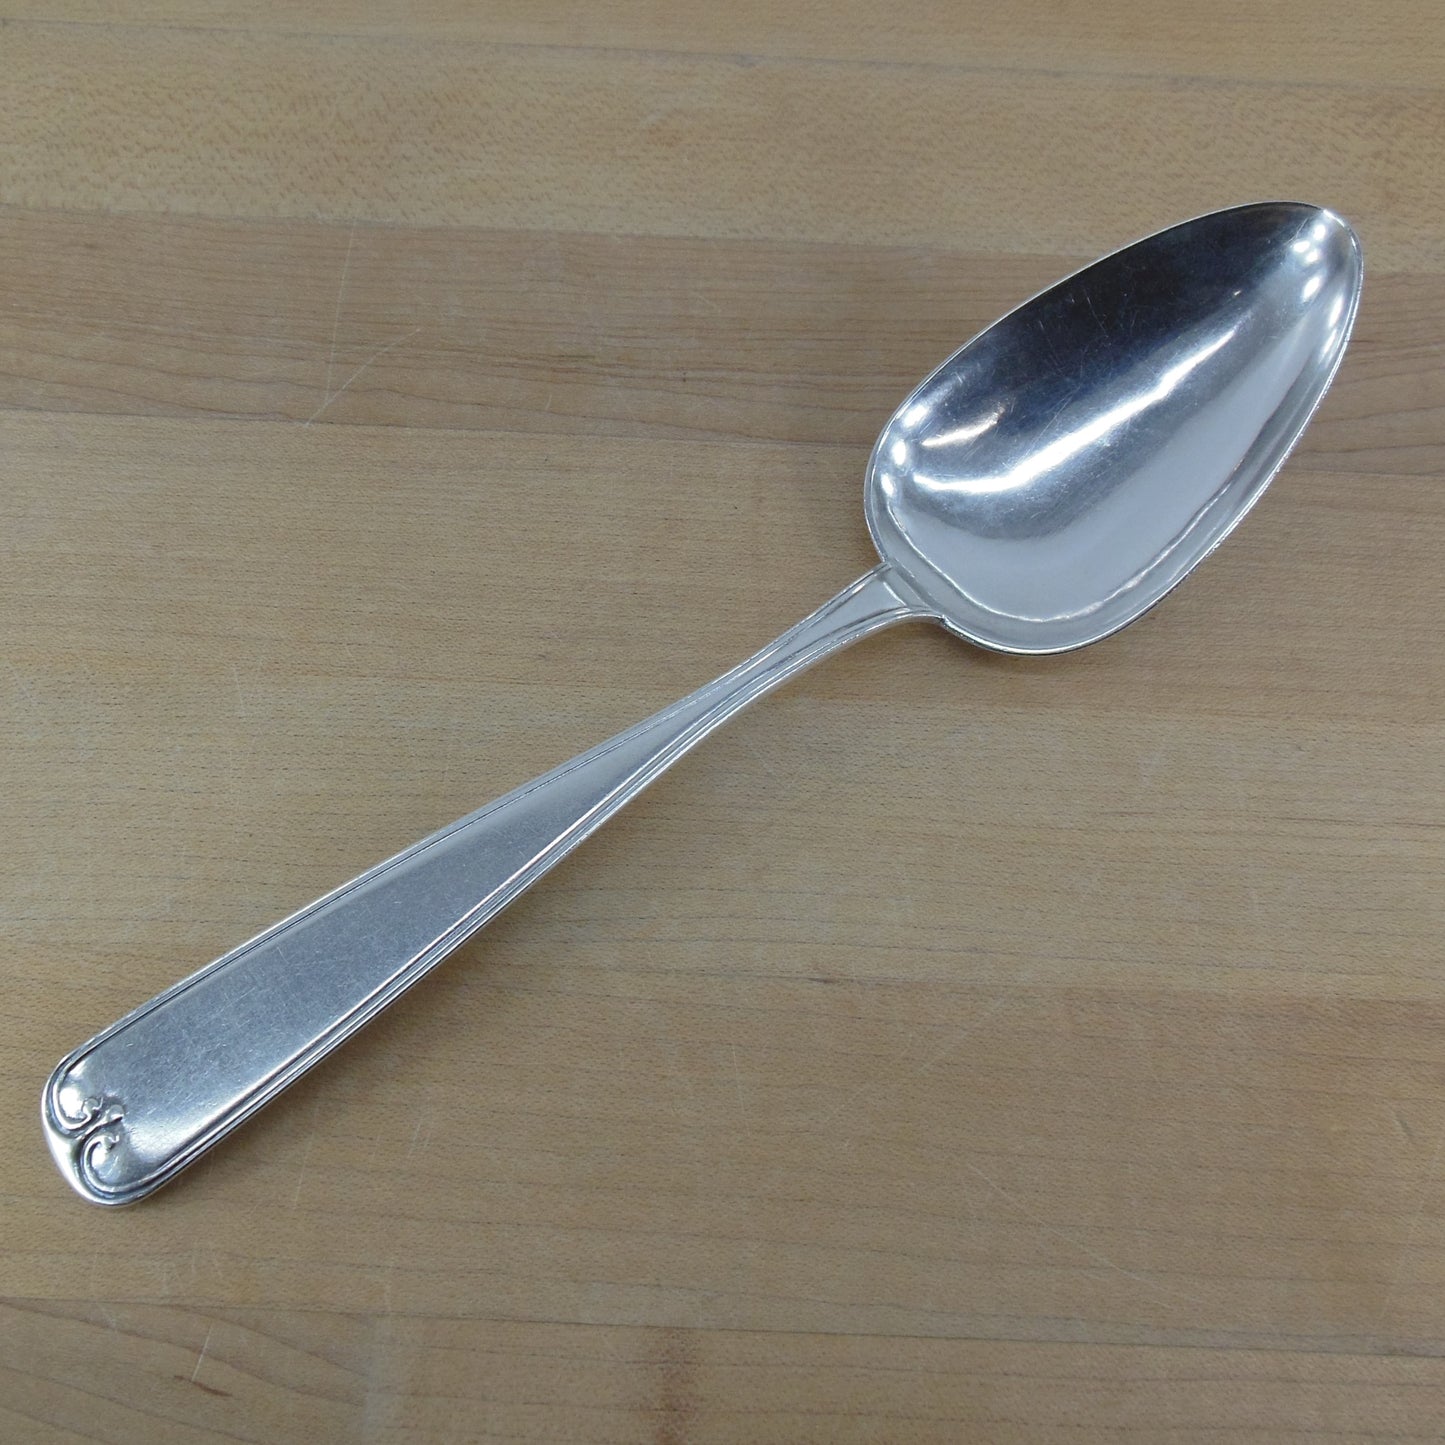 European 828 Silver 13 1/4 Loth Table Solid Serving Spoon